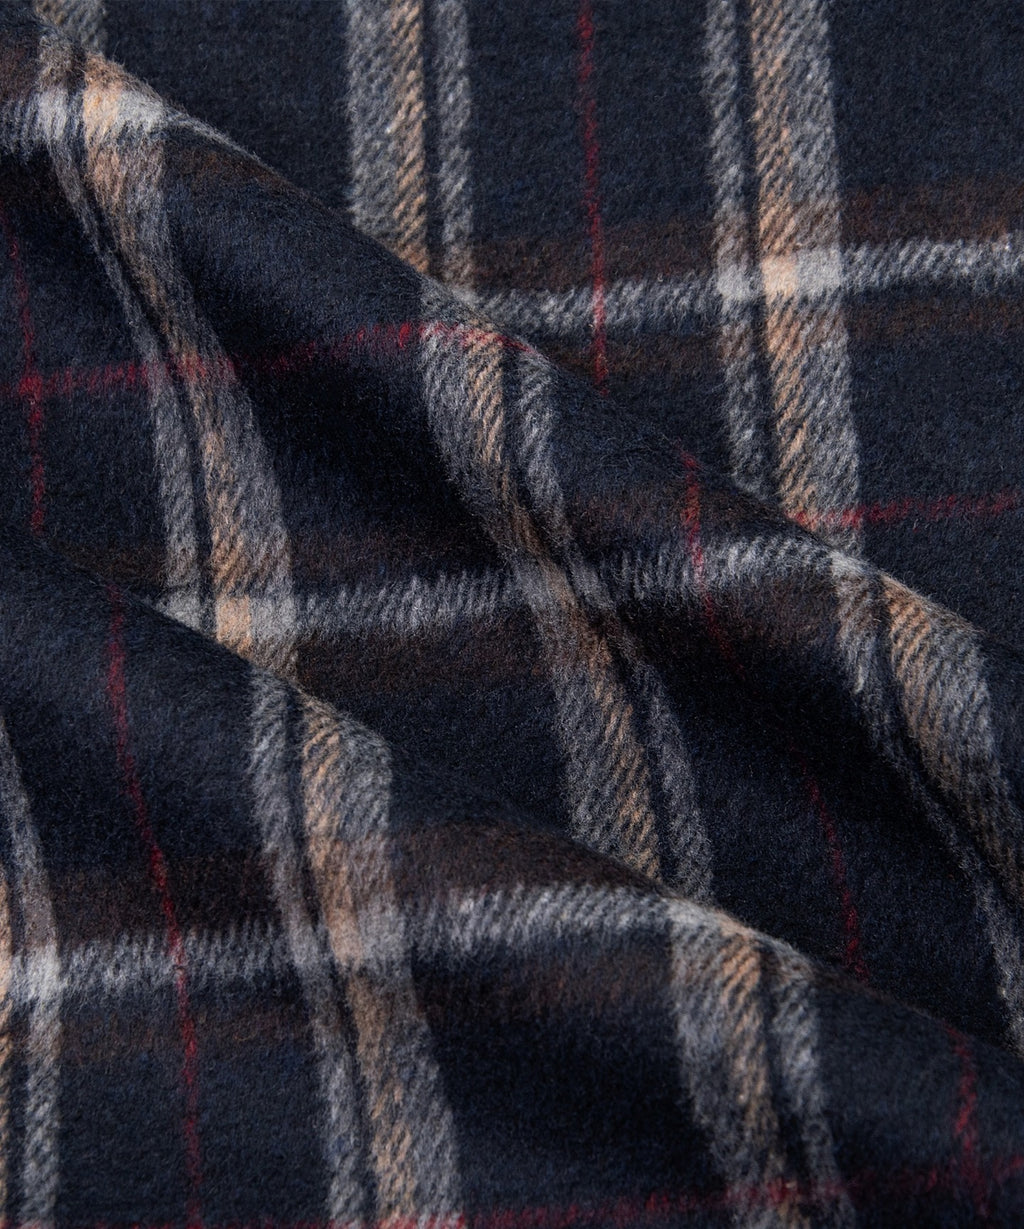  Fabric closeup on Paper Planes Plaid Brushed Flannel Tunic.